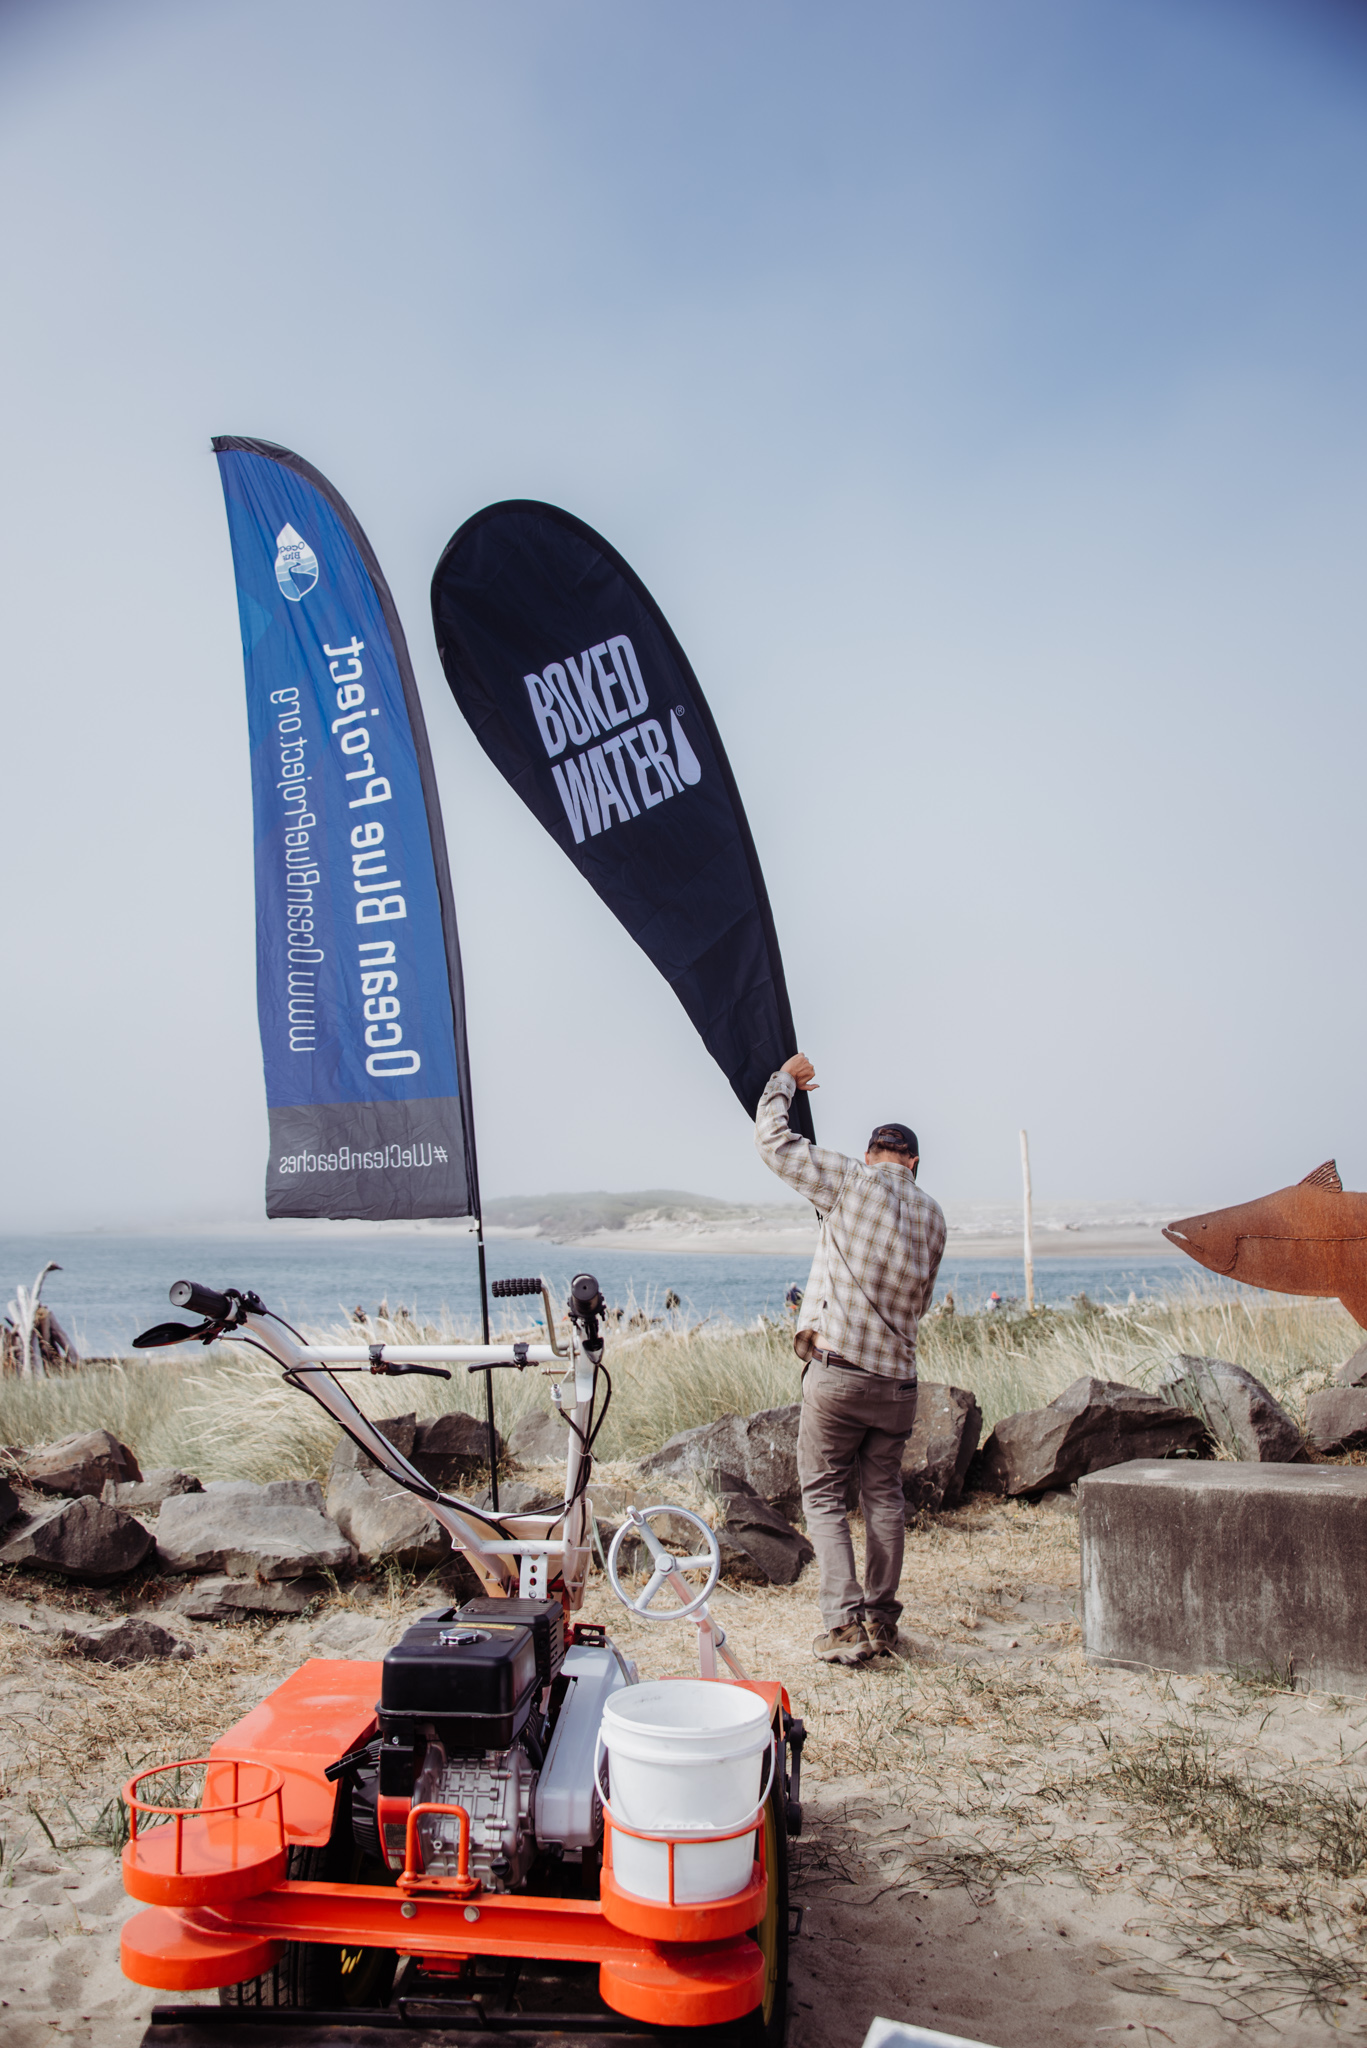 ocean blue and boxed water signs at an ocean blue project event. 
man putting up boxed water sign at the beach